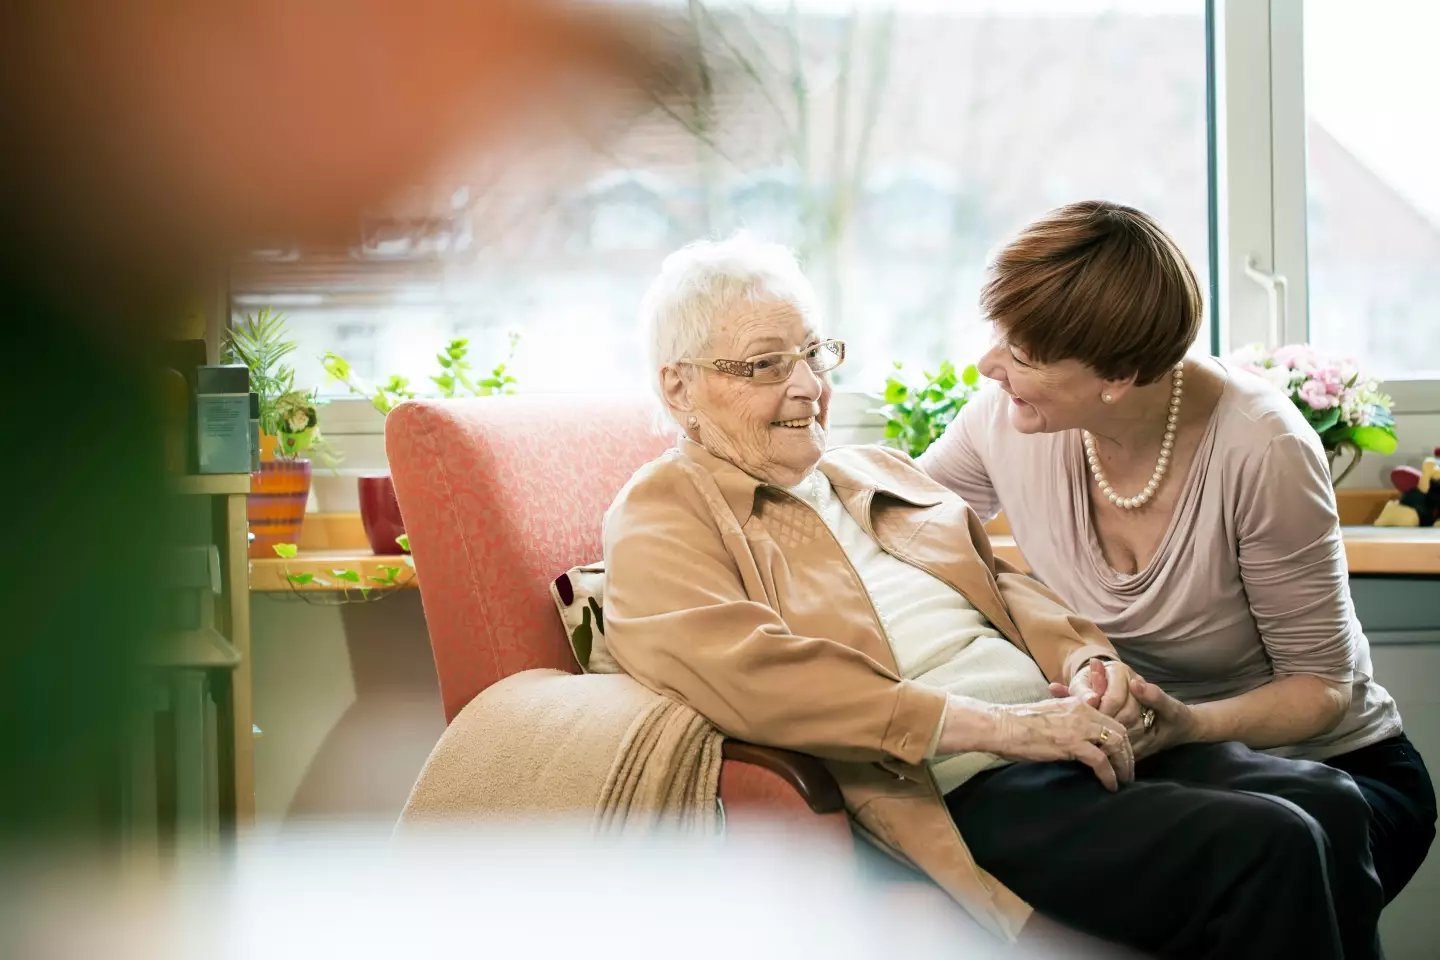 1 in 6 people over the age of 80 have dementia. (Alamy)